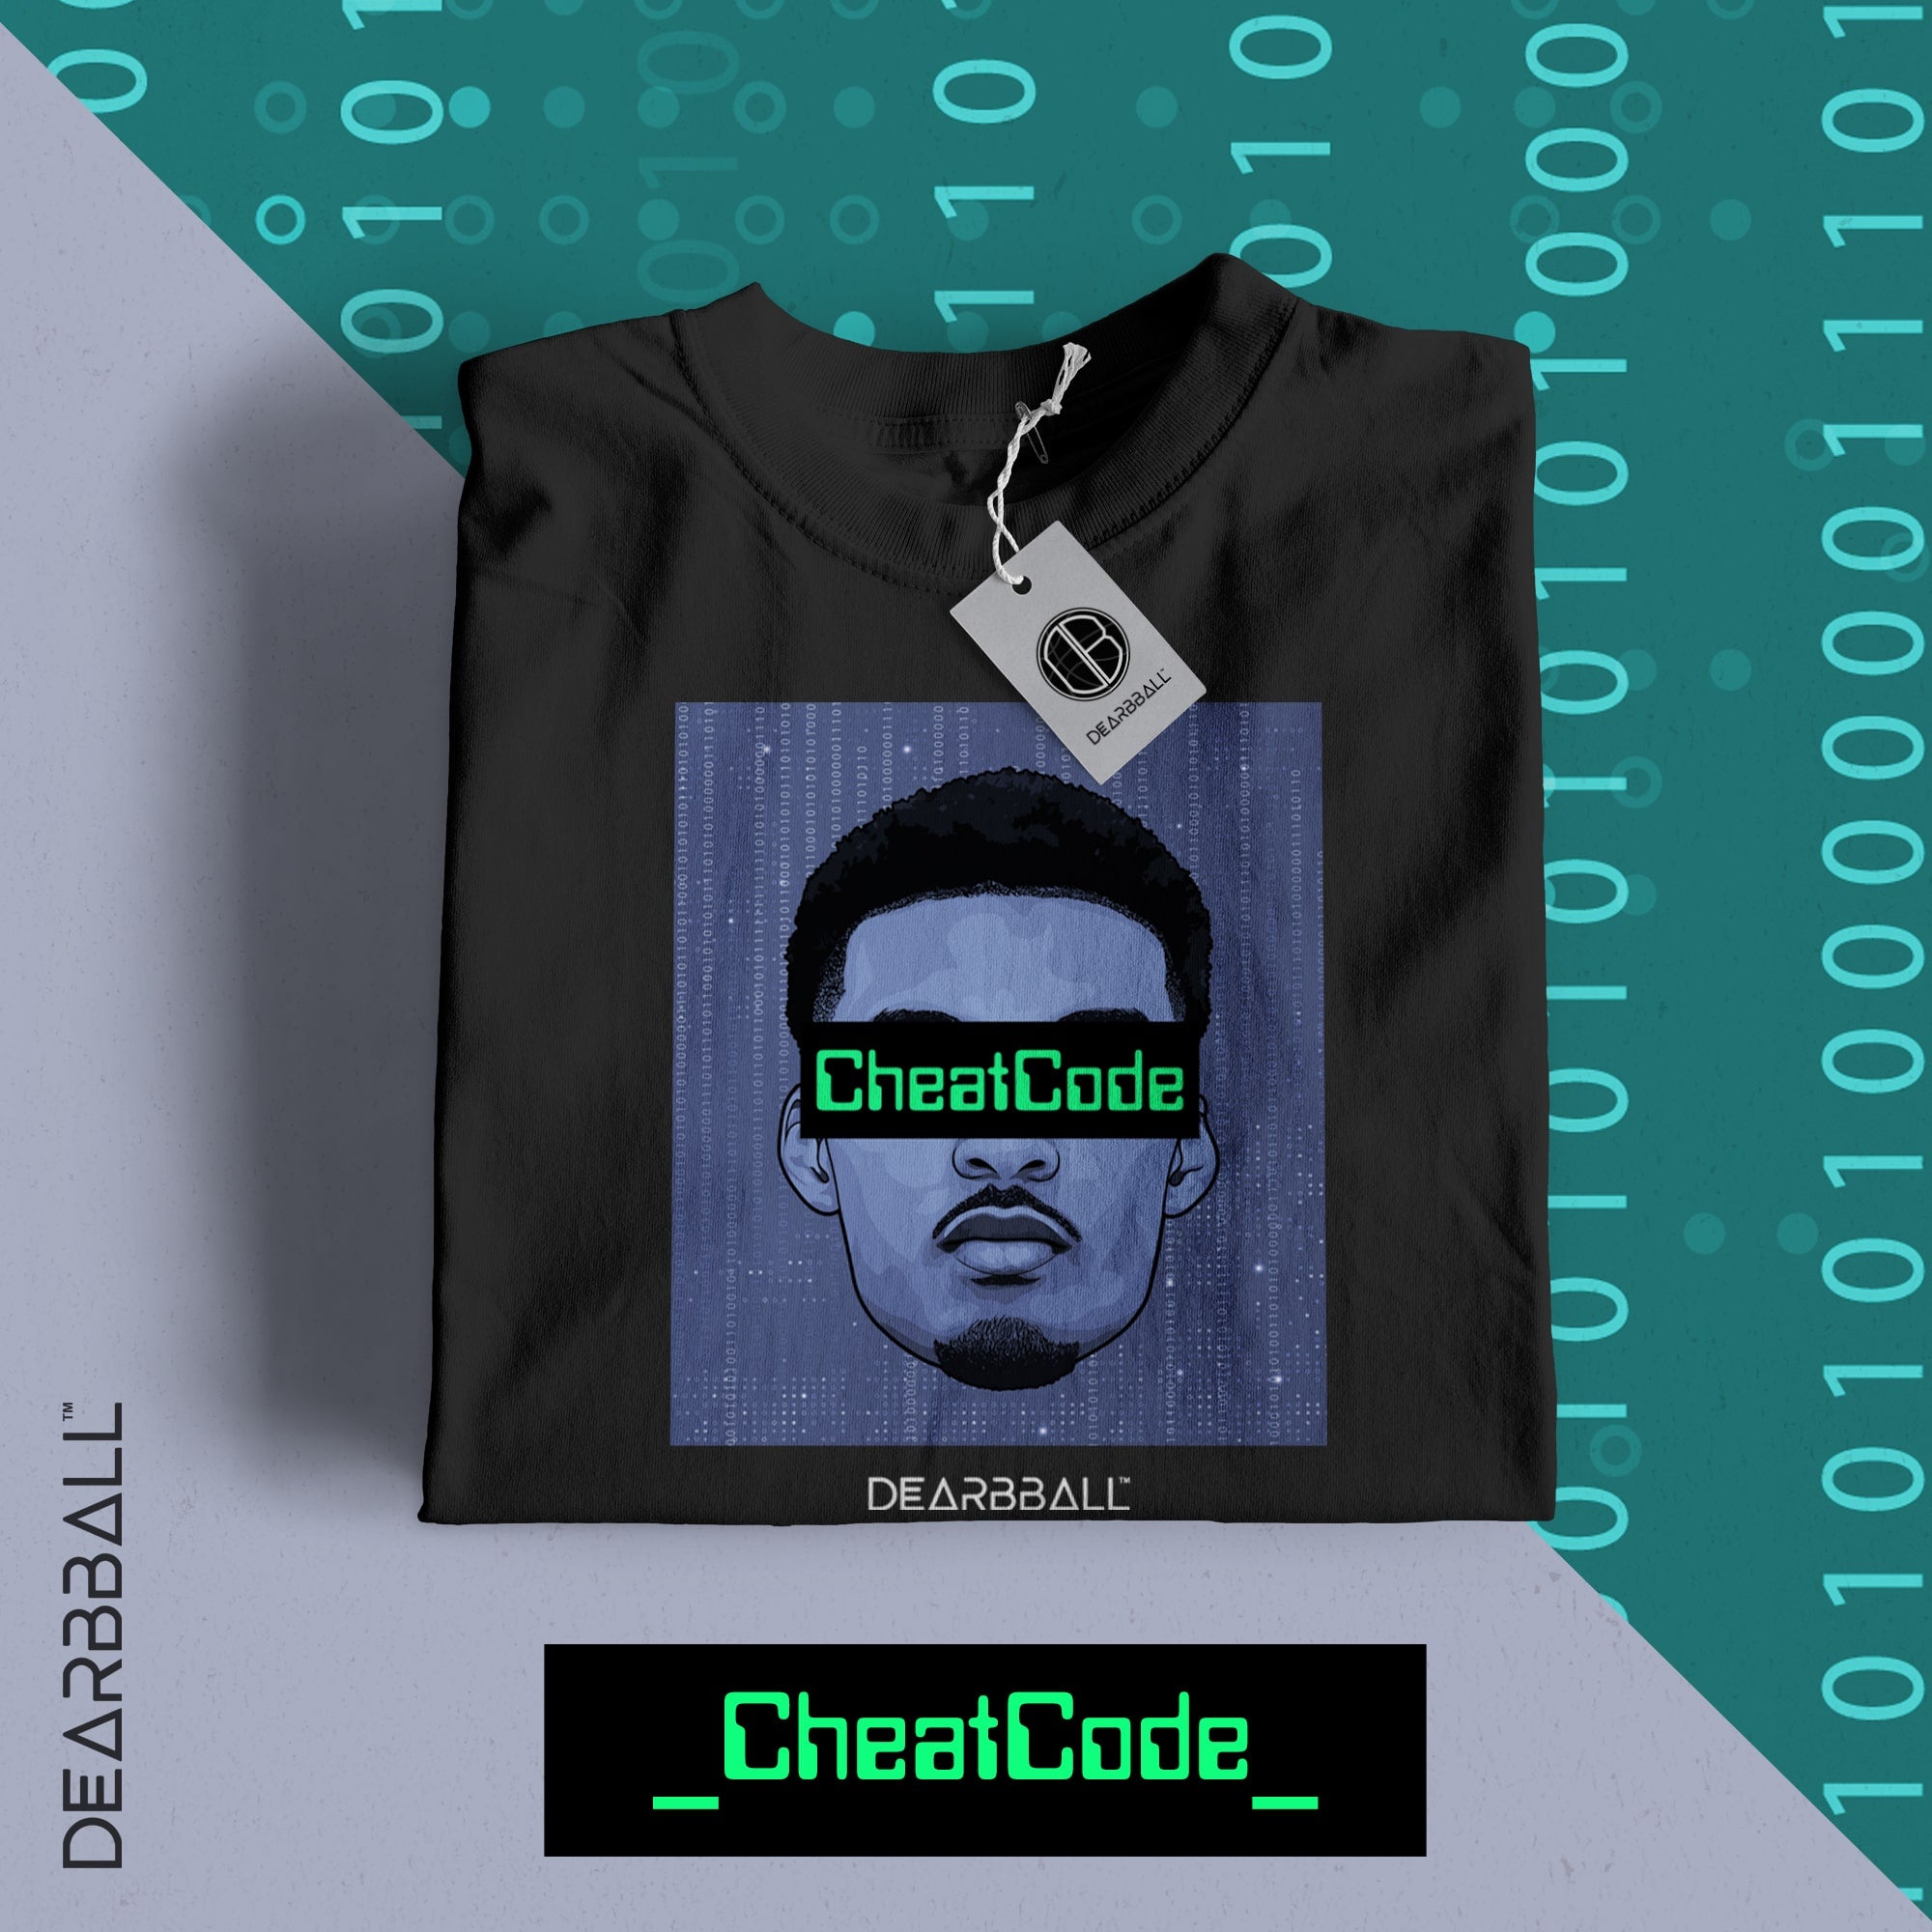 [CHILD] DearBBall T-Shirt - CheatCode Limited Edition